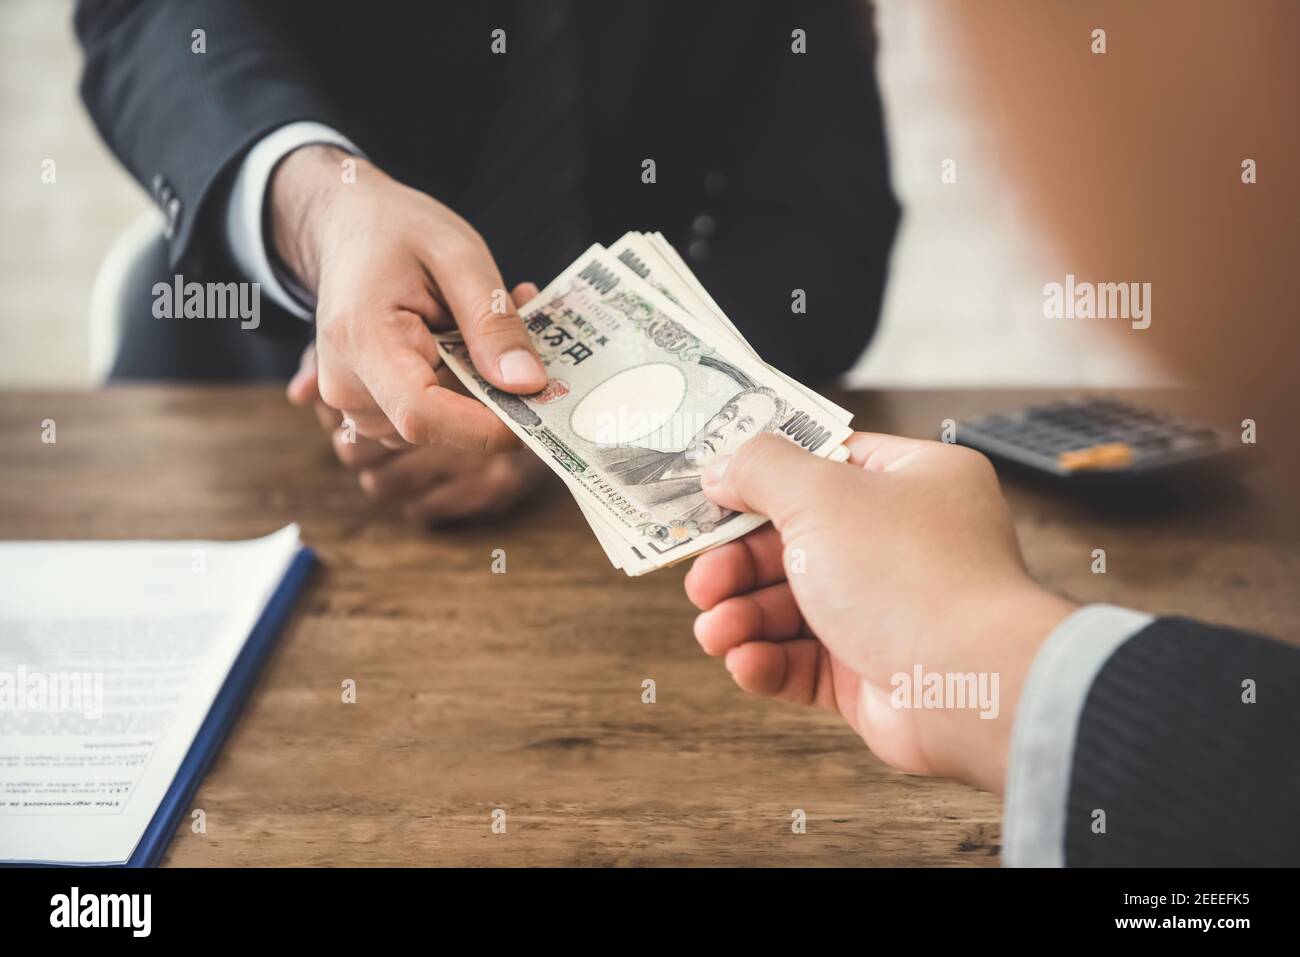 Businessman giving money, Japanese yen currency, to his partner at the table Stock Photo